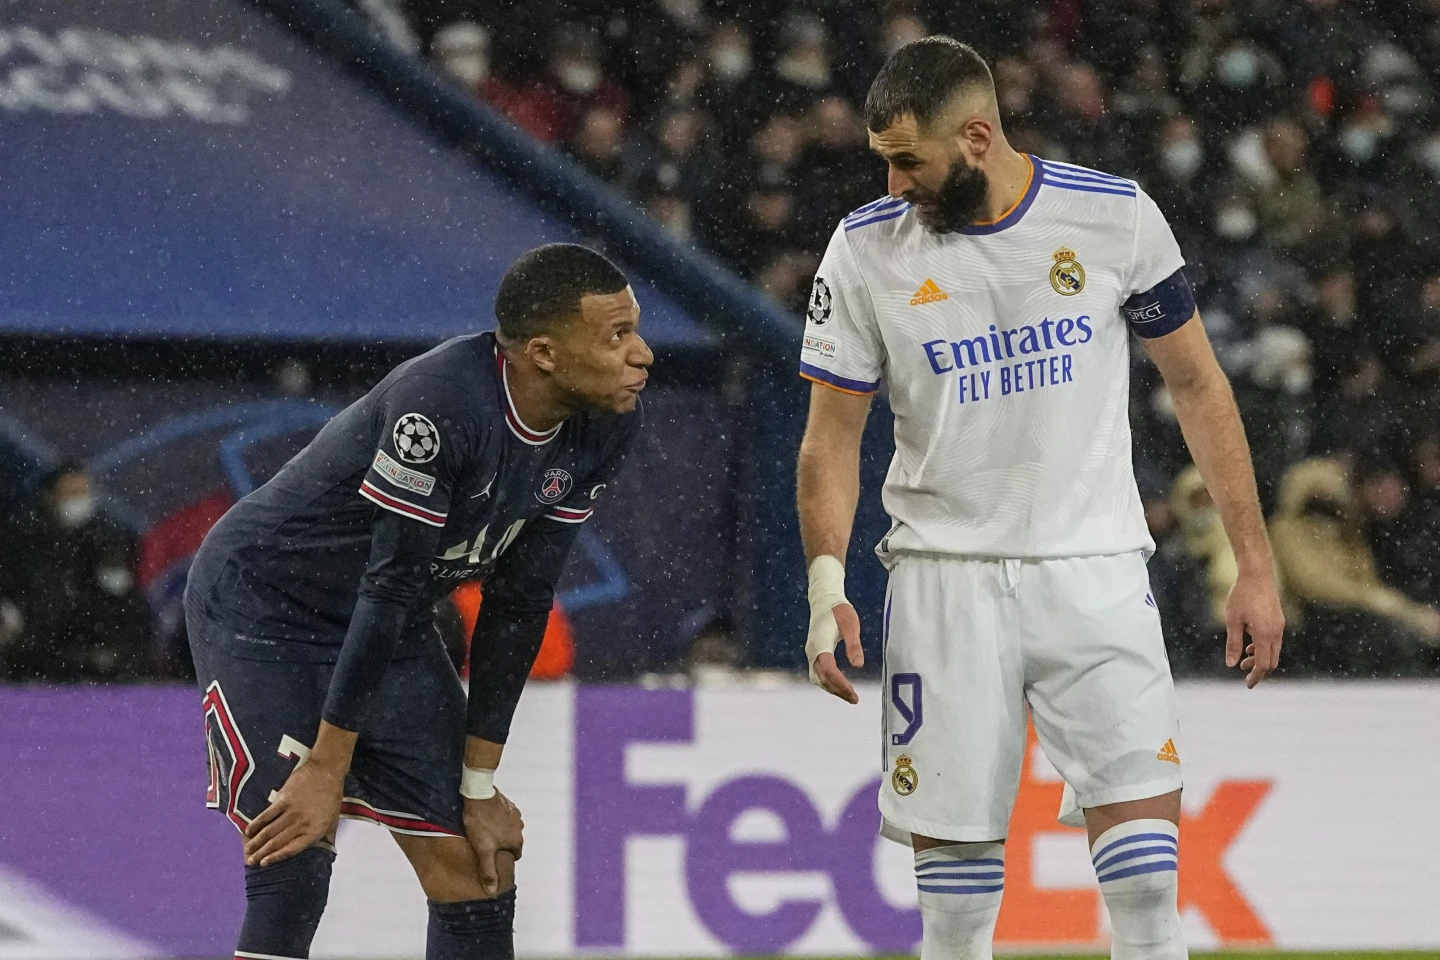 A promising future for Mbappé but bad news for Qatari-owned PSG FC that is in tricky transition